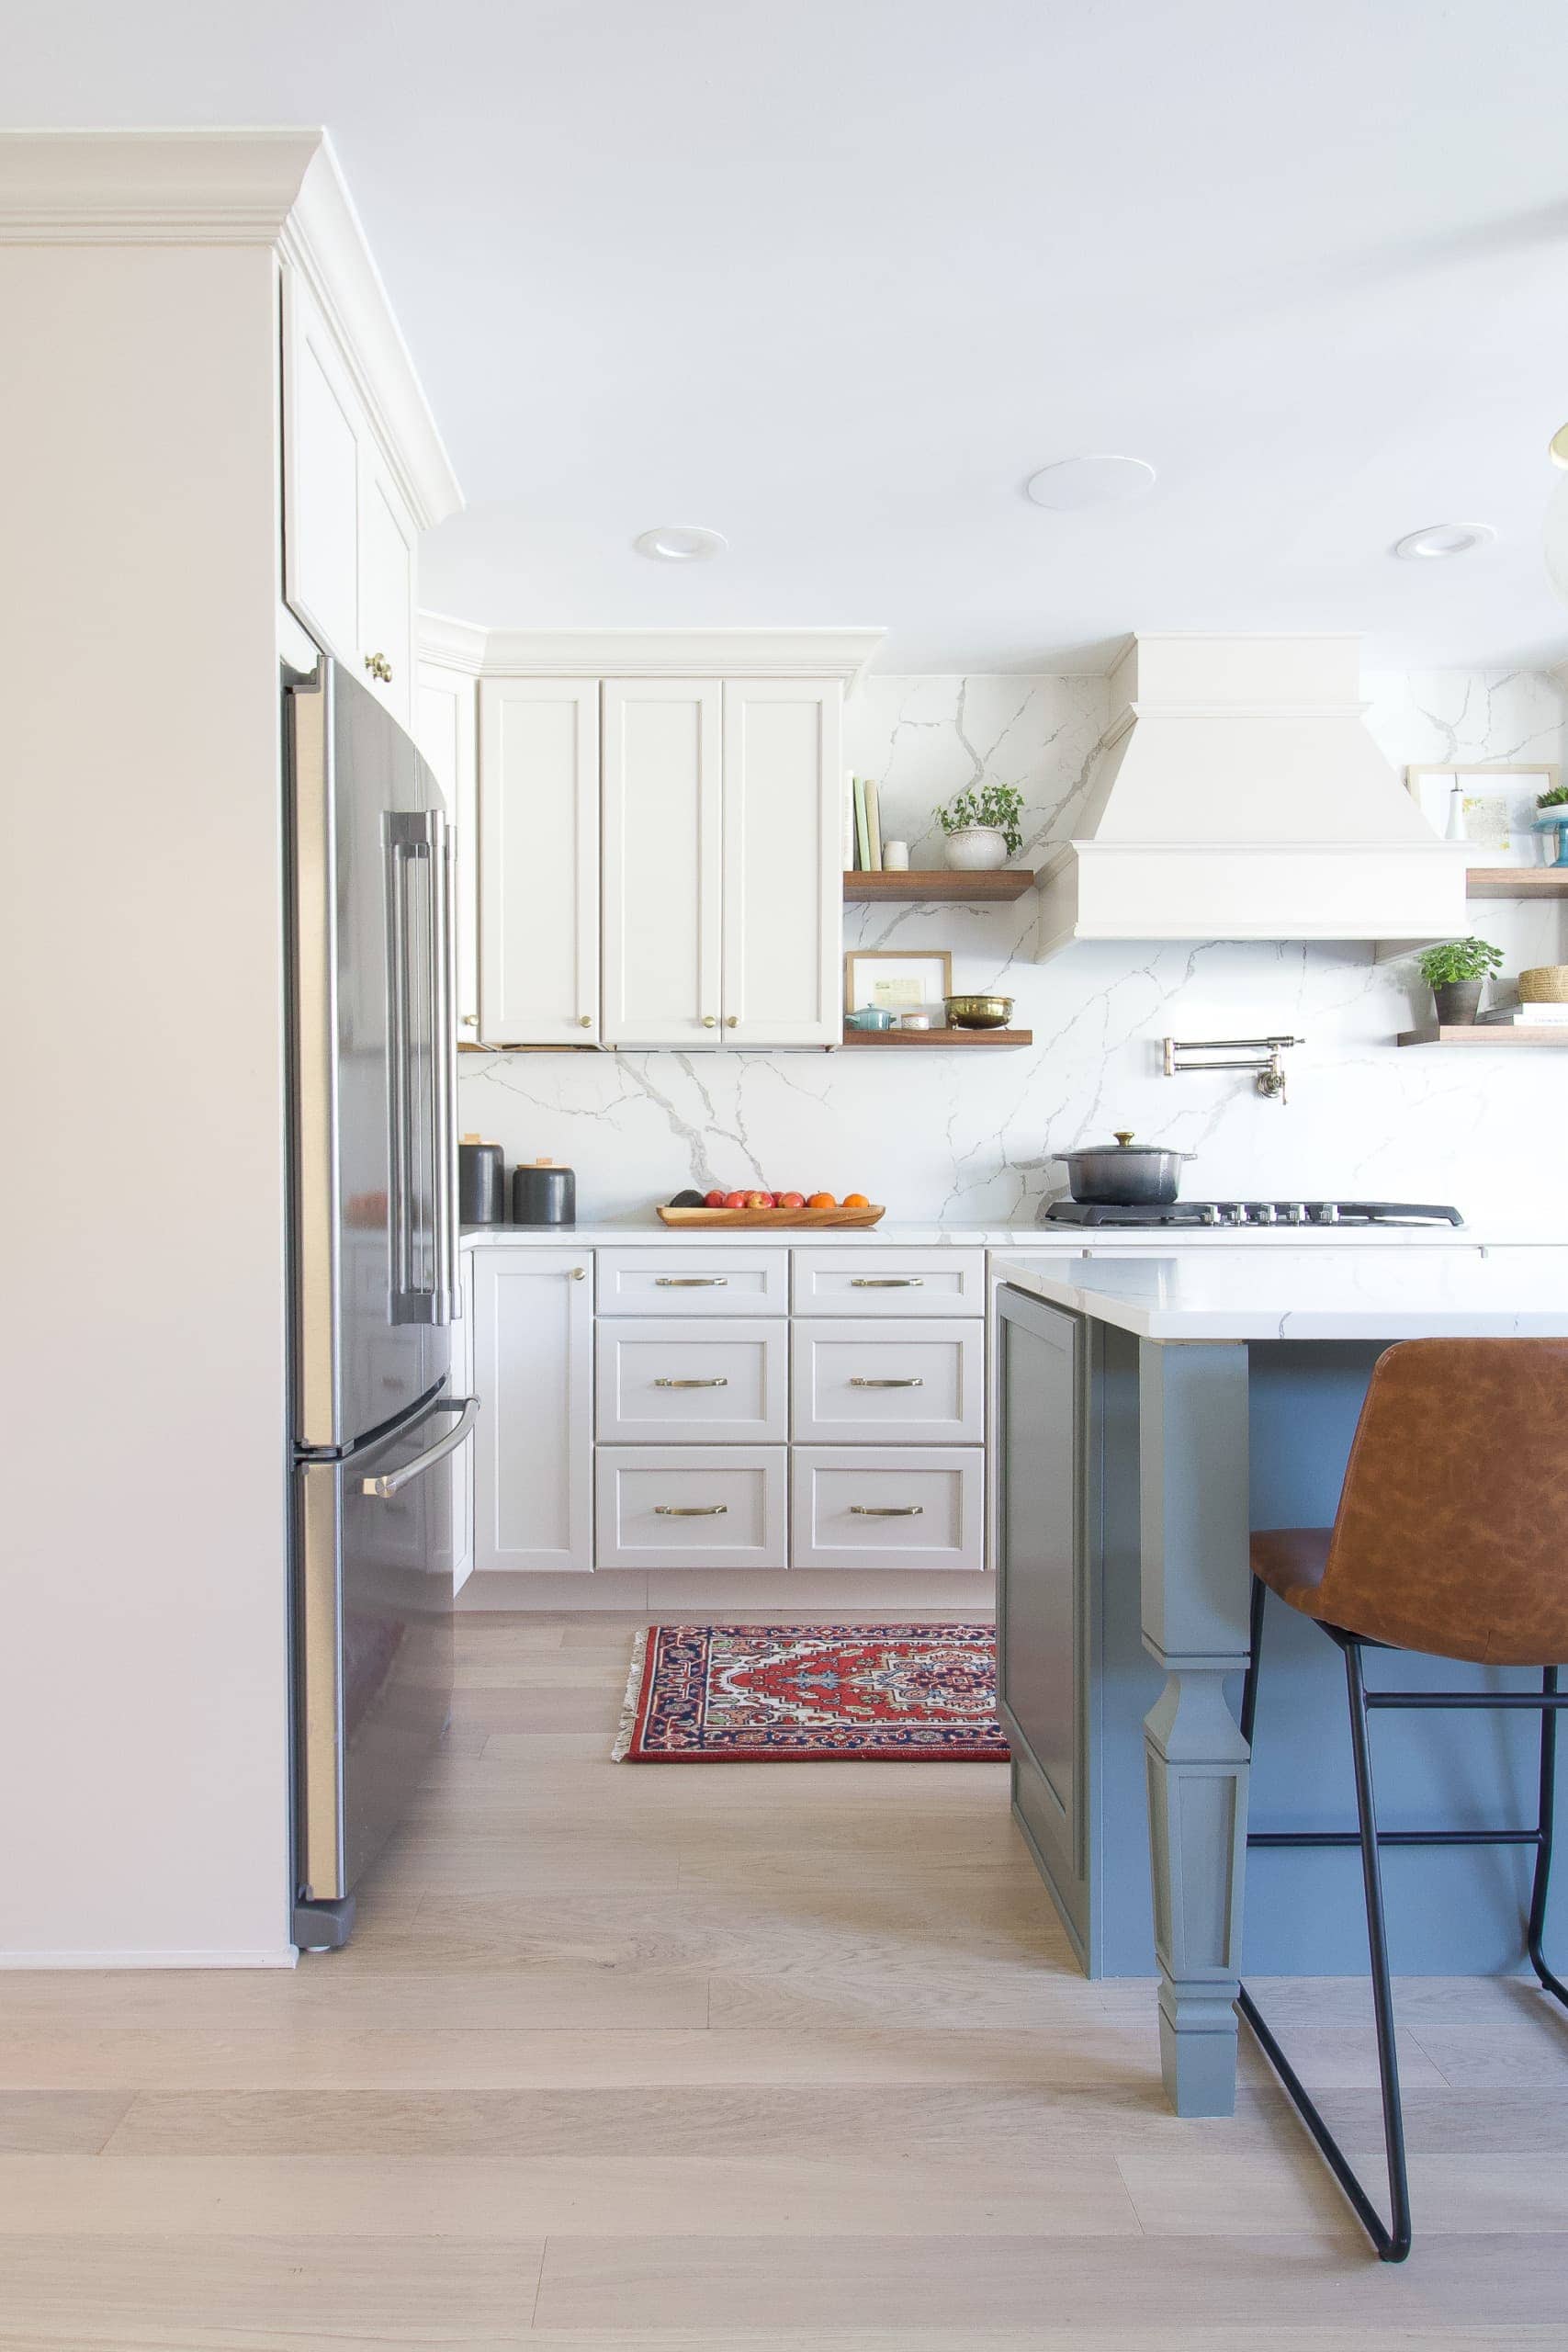 My best tips for buying a rug for your kitchen